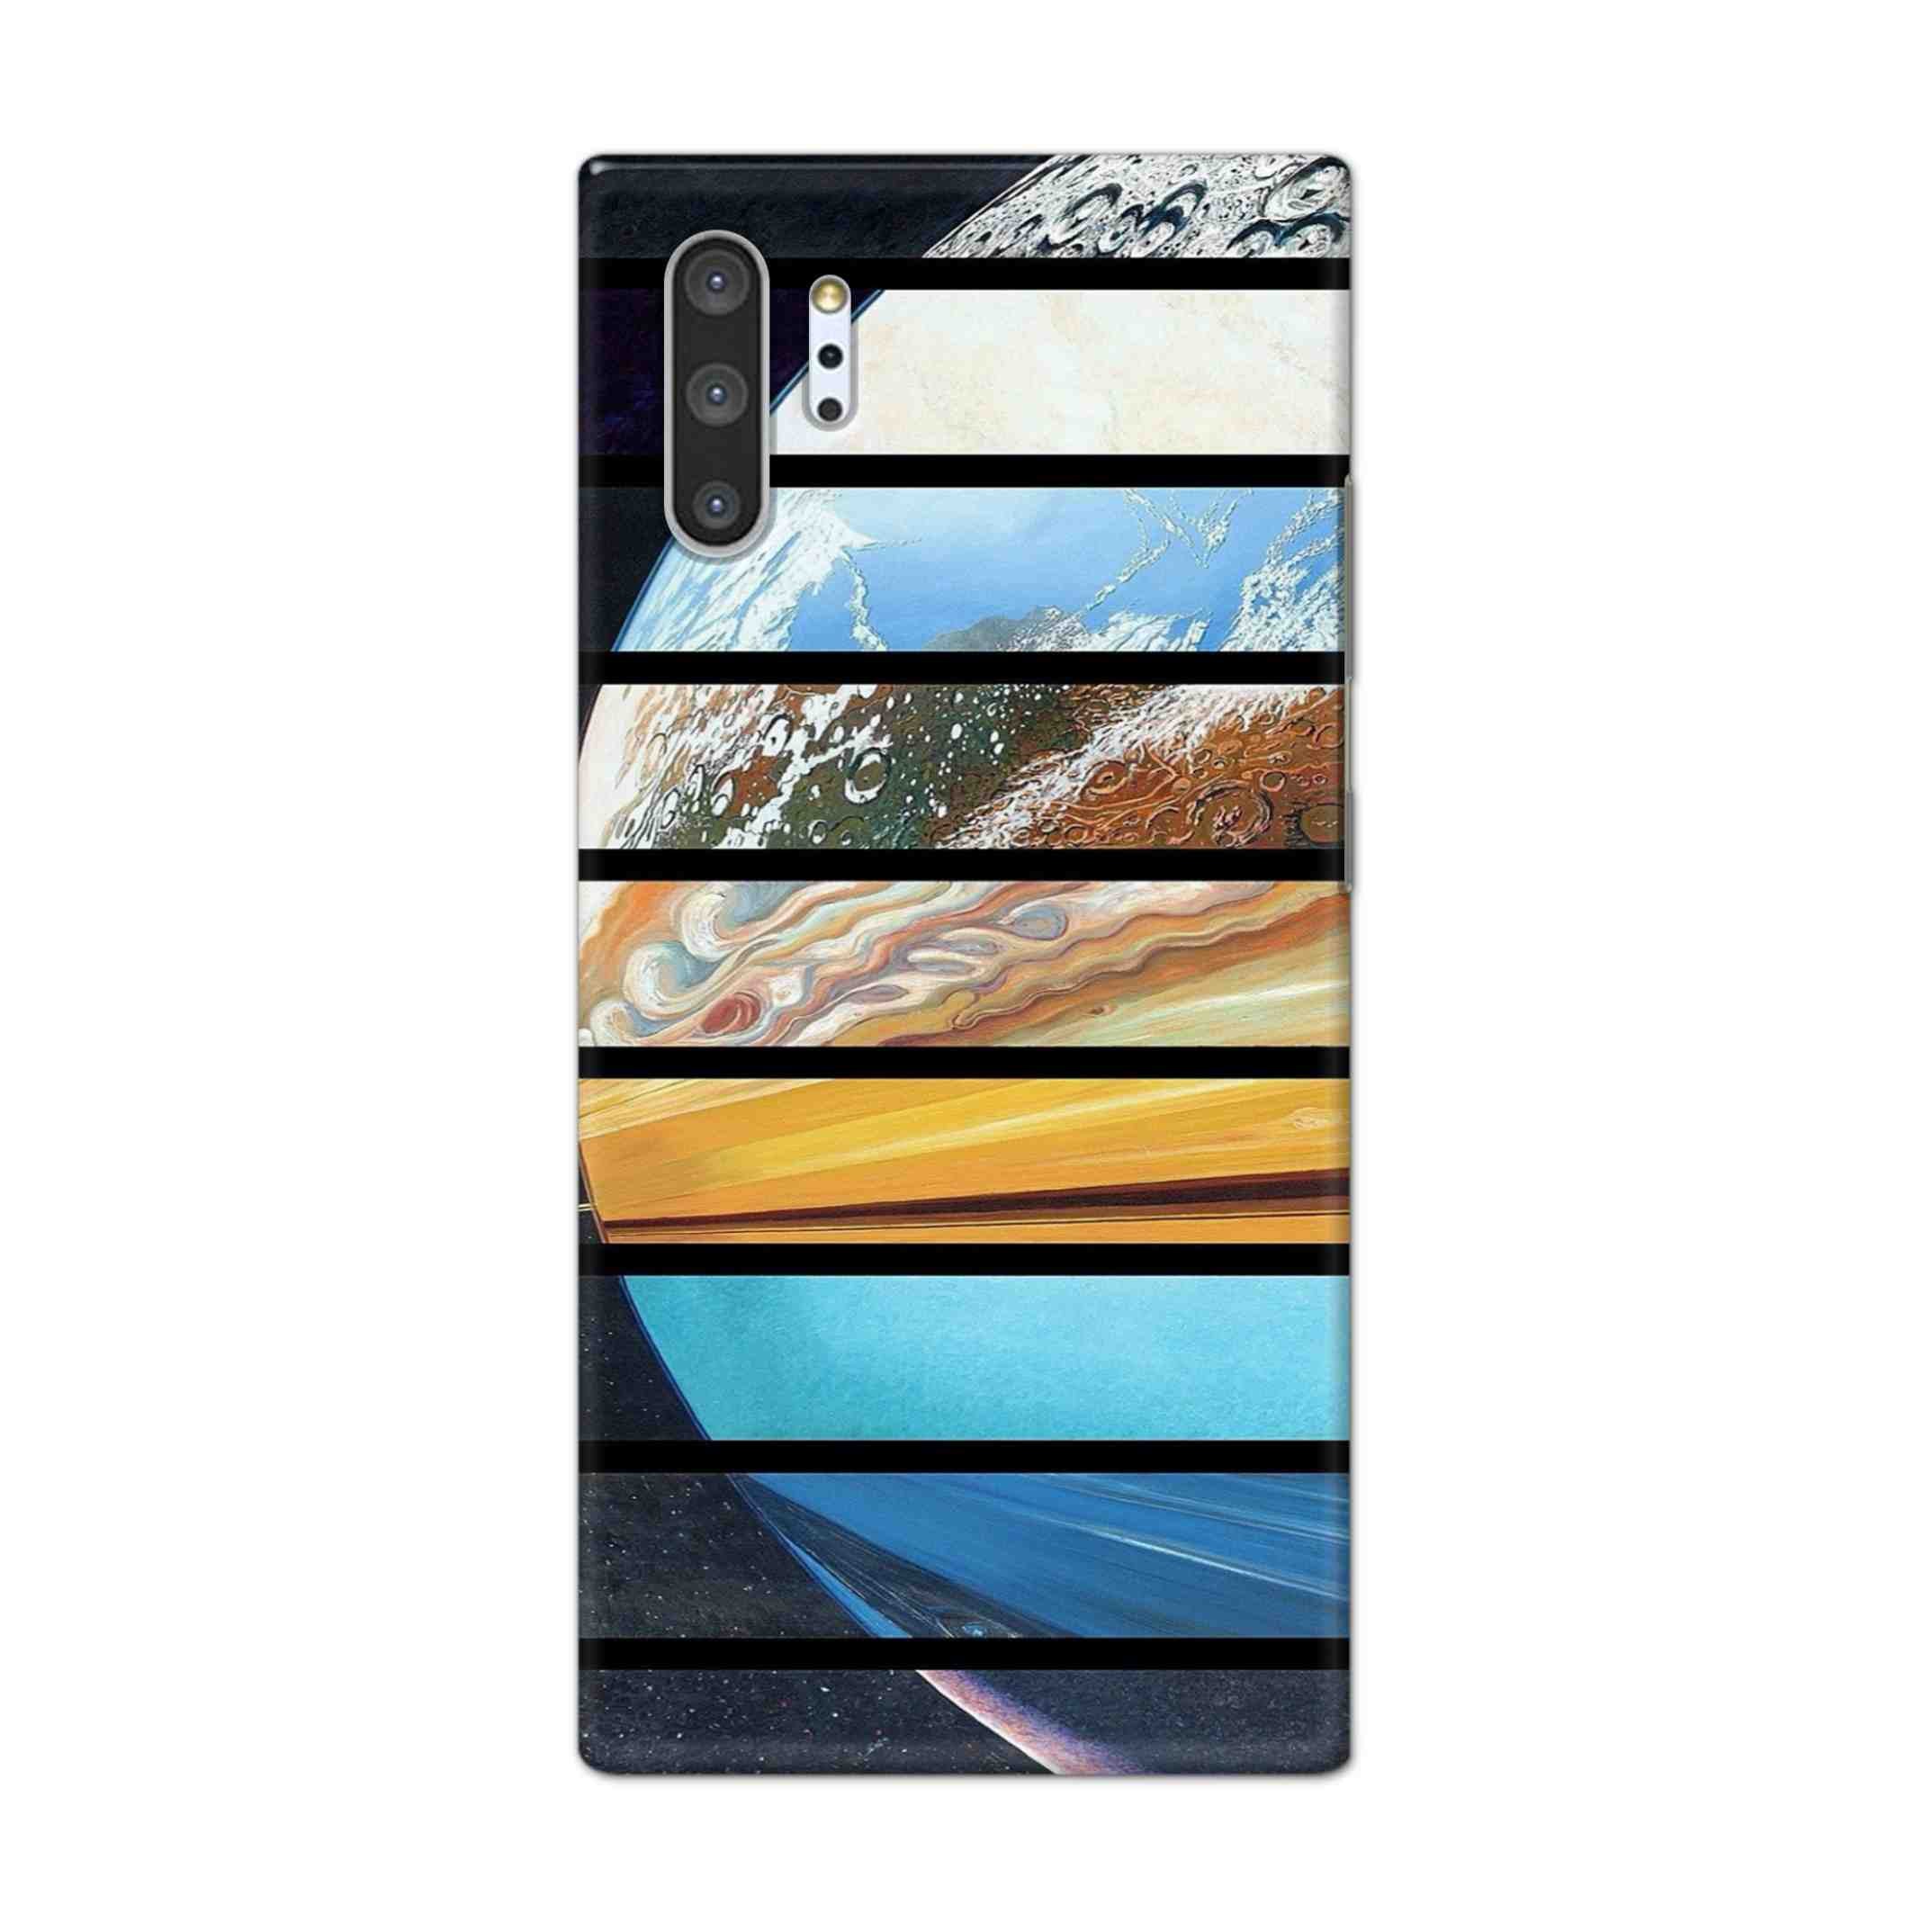 Buy Colourful Earth Hard Back Mobile Phone Case Cover For Samsung Galaxy Note 10 Pro Online